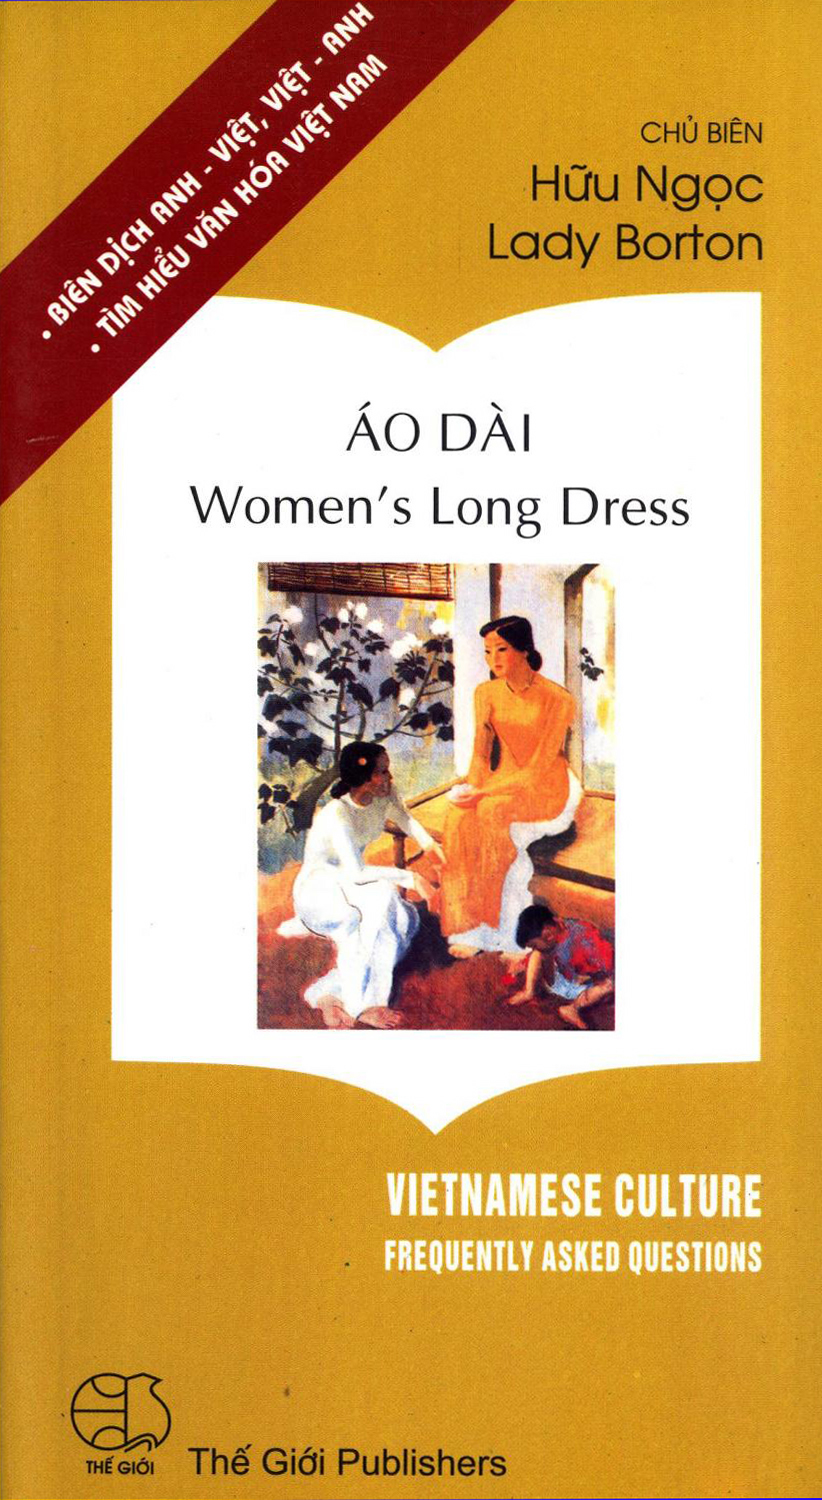 Ao Dai (Frequently Asked Questions About Vietnamese Culture/The Gioi) (image)